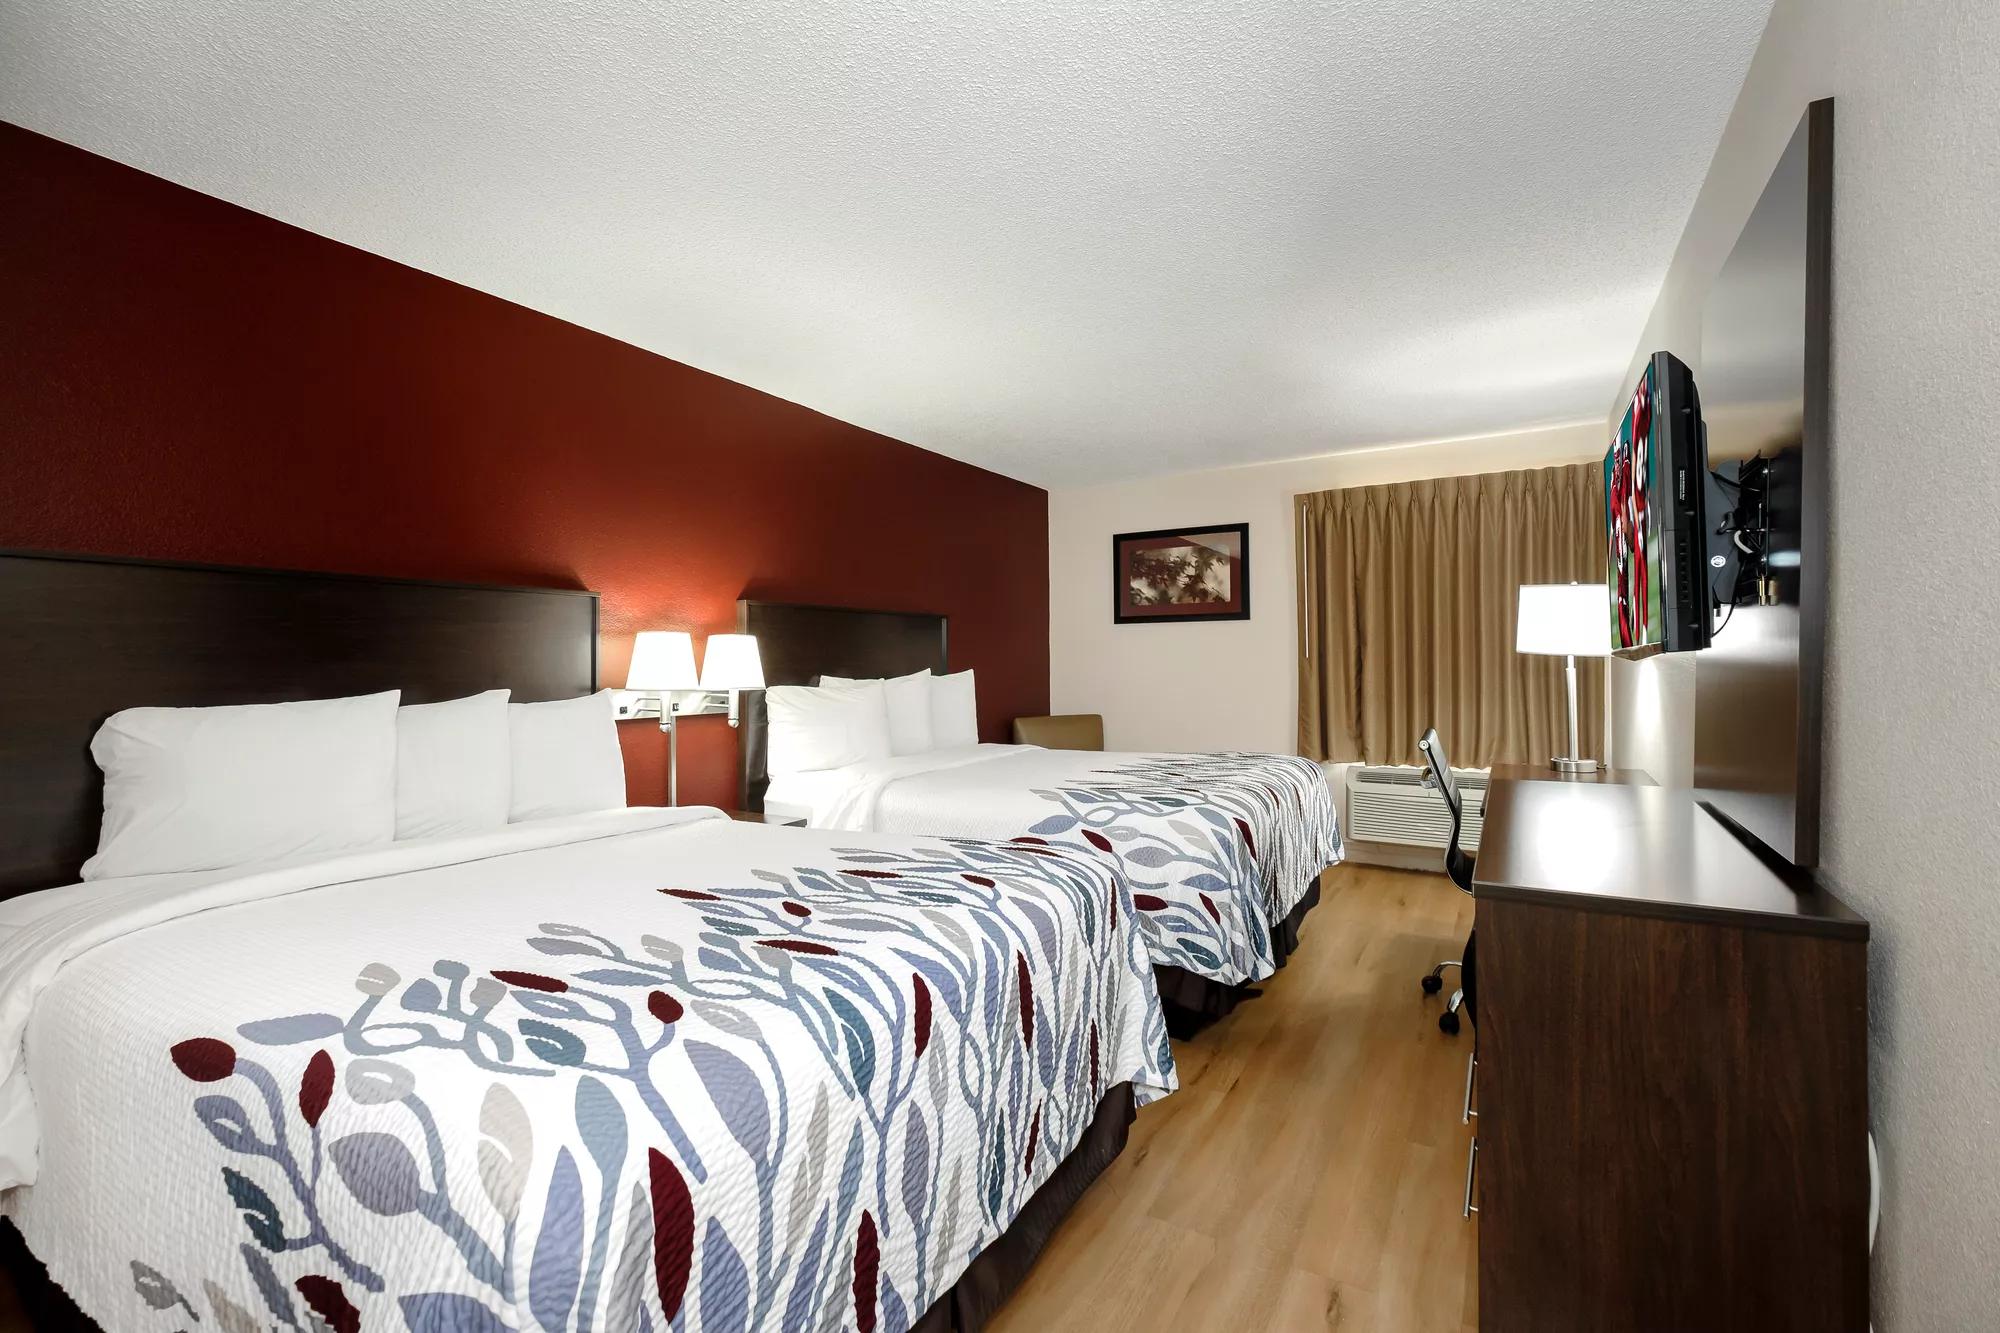 Red Roof Inn Hillsville Double Bed Room Image Details